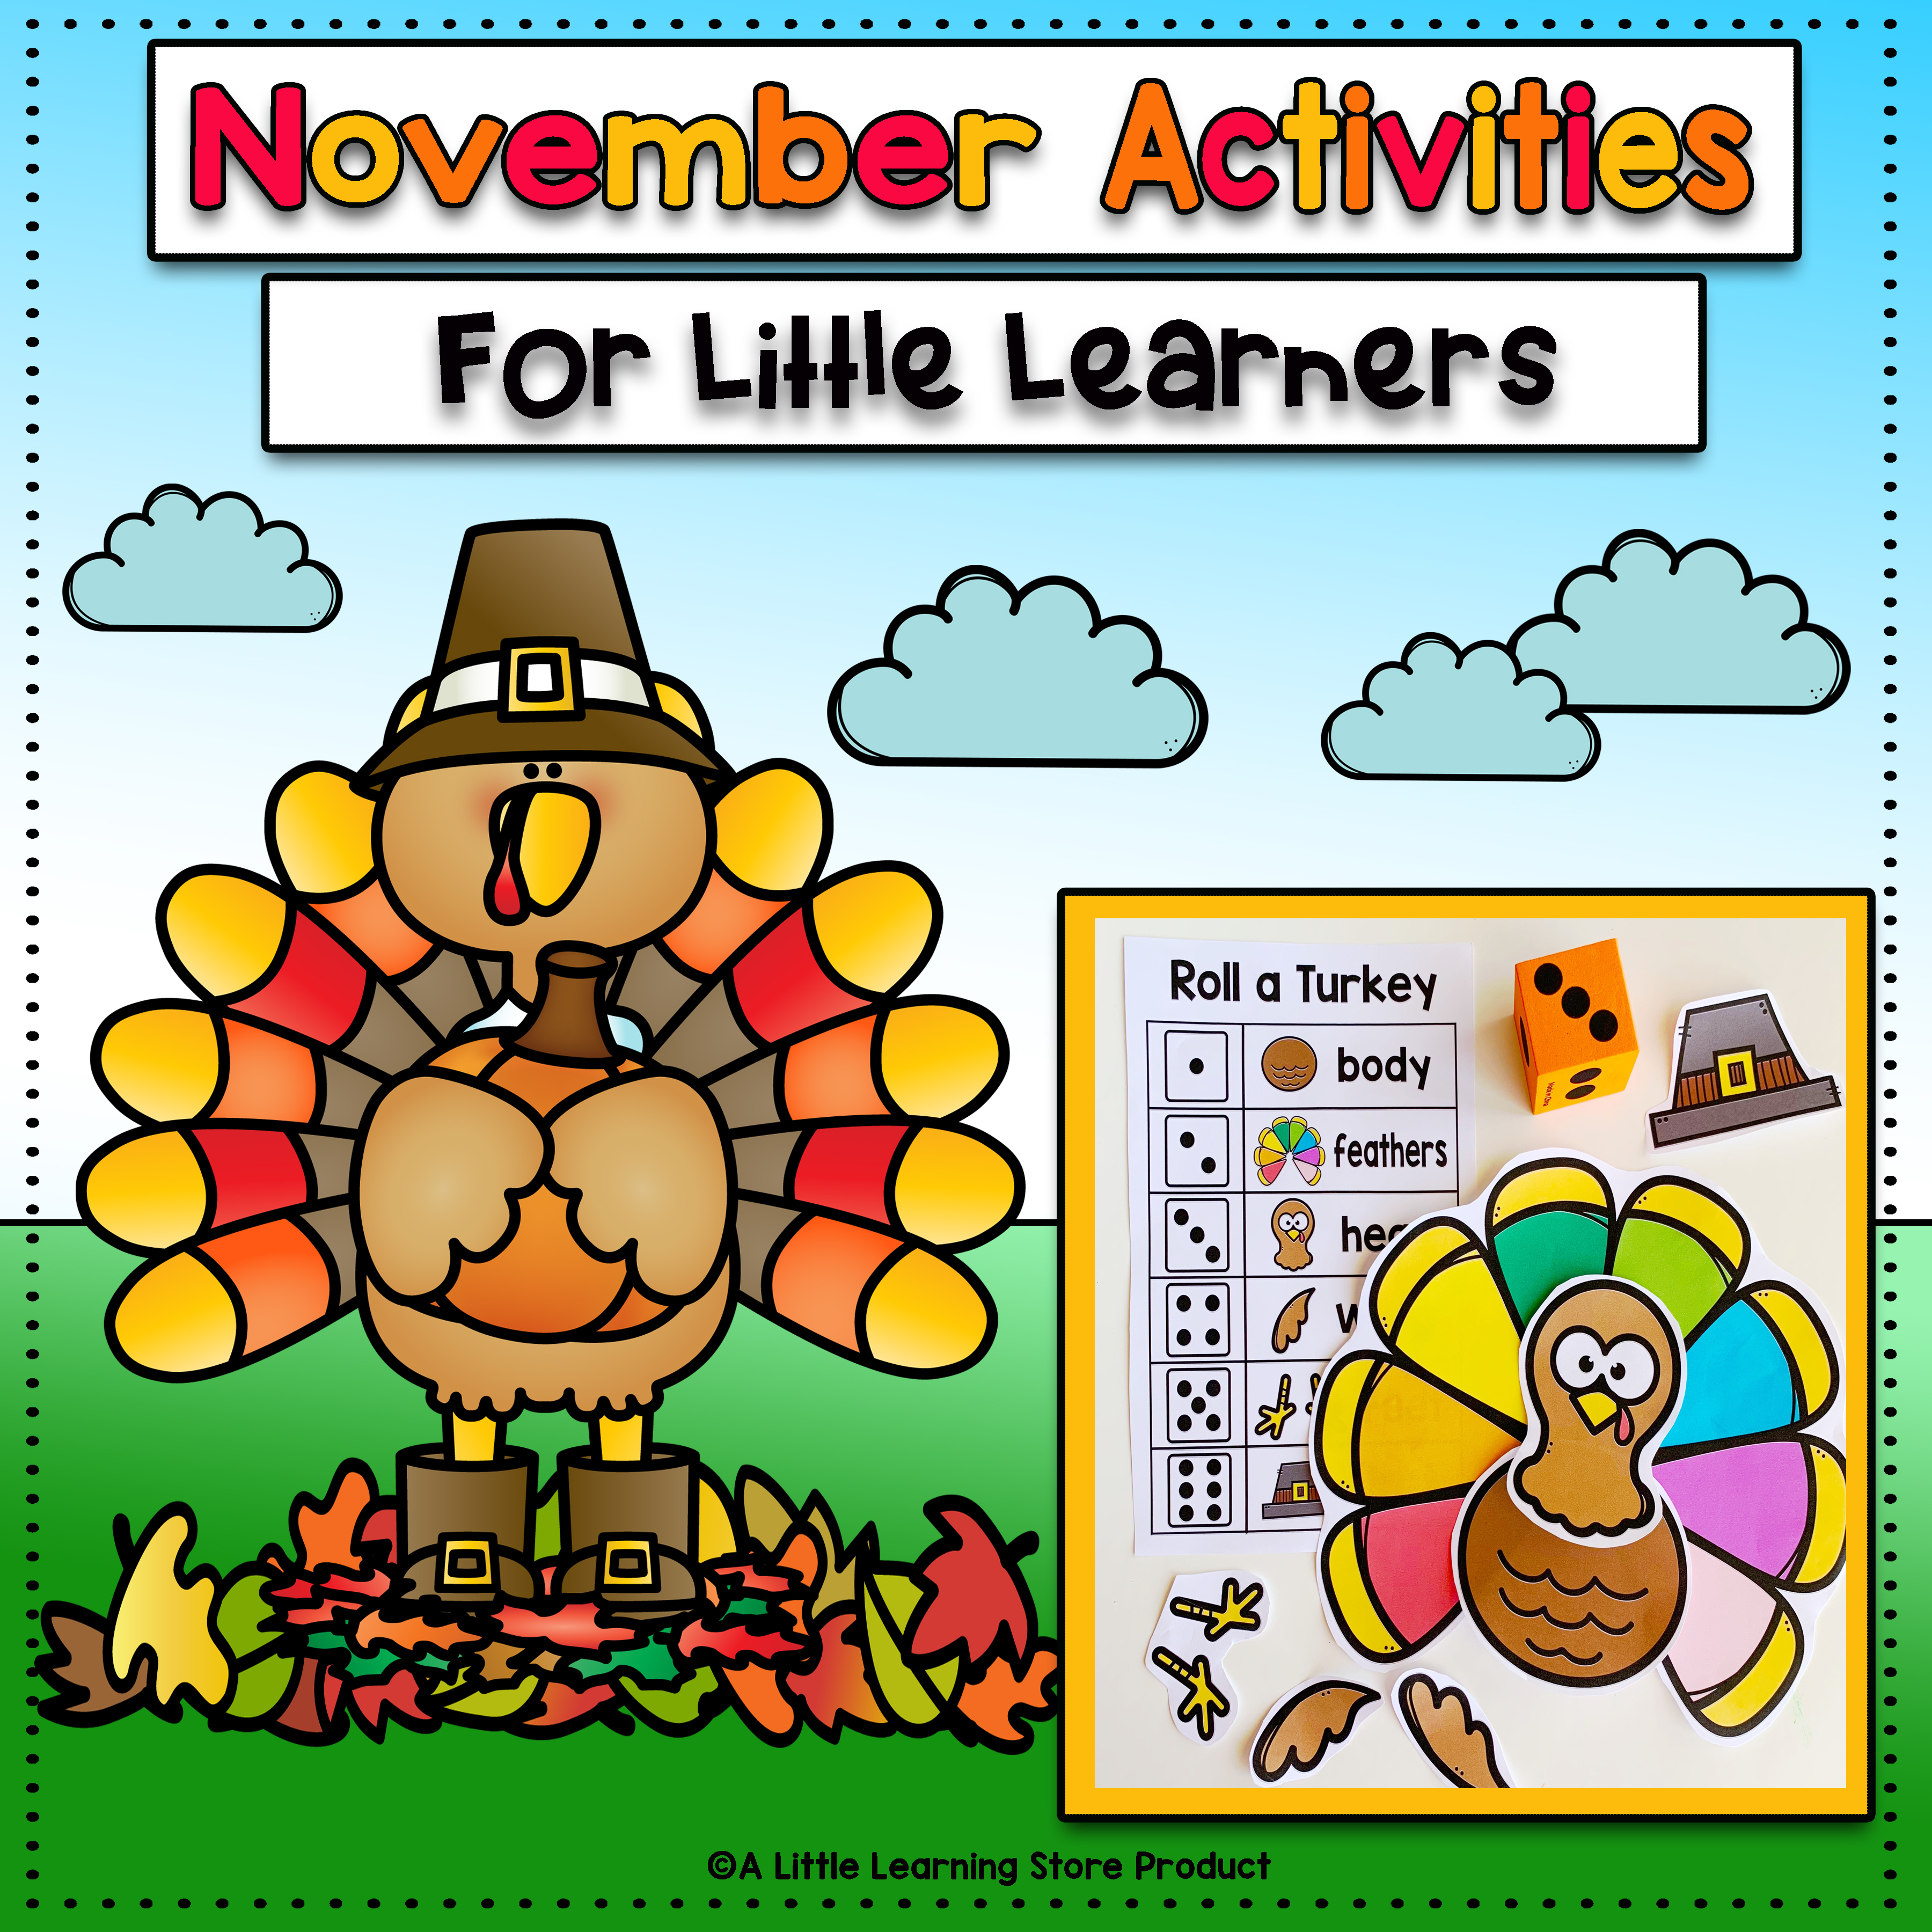 November Activities for Little Learners